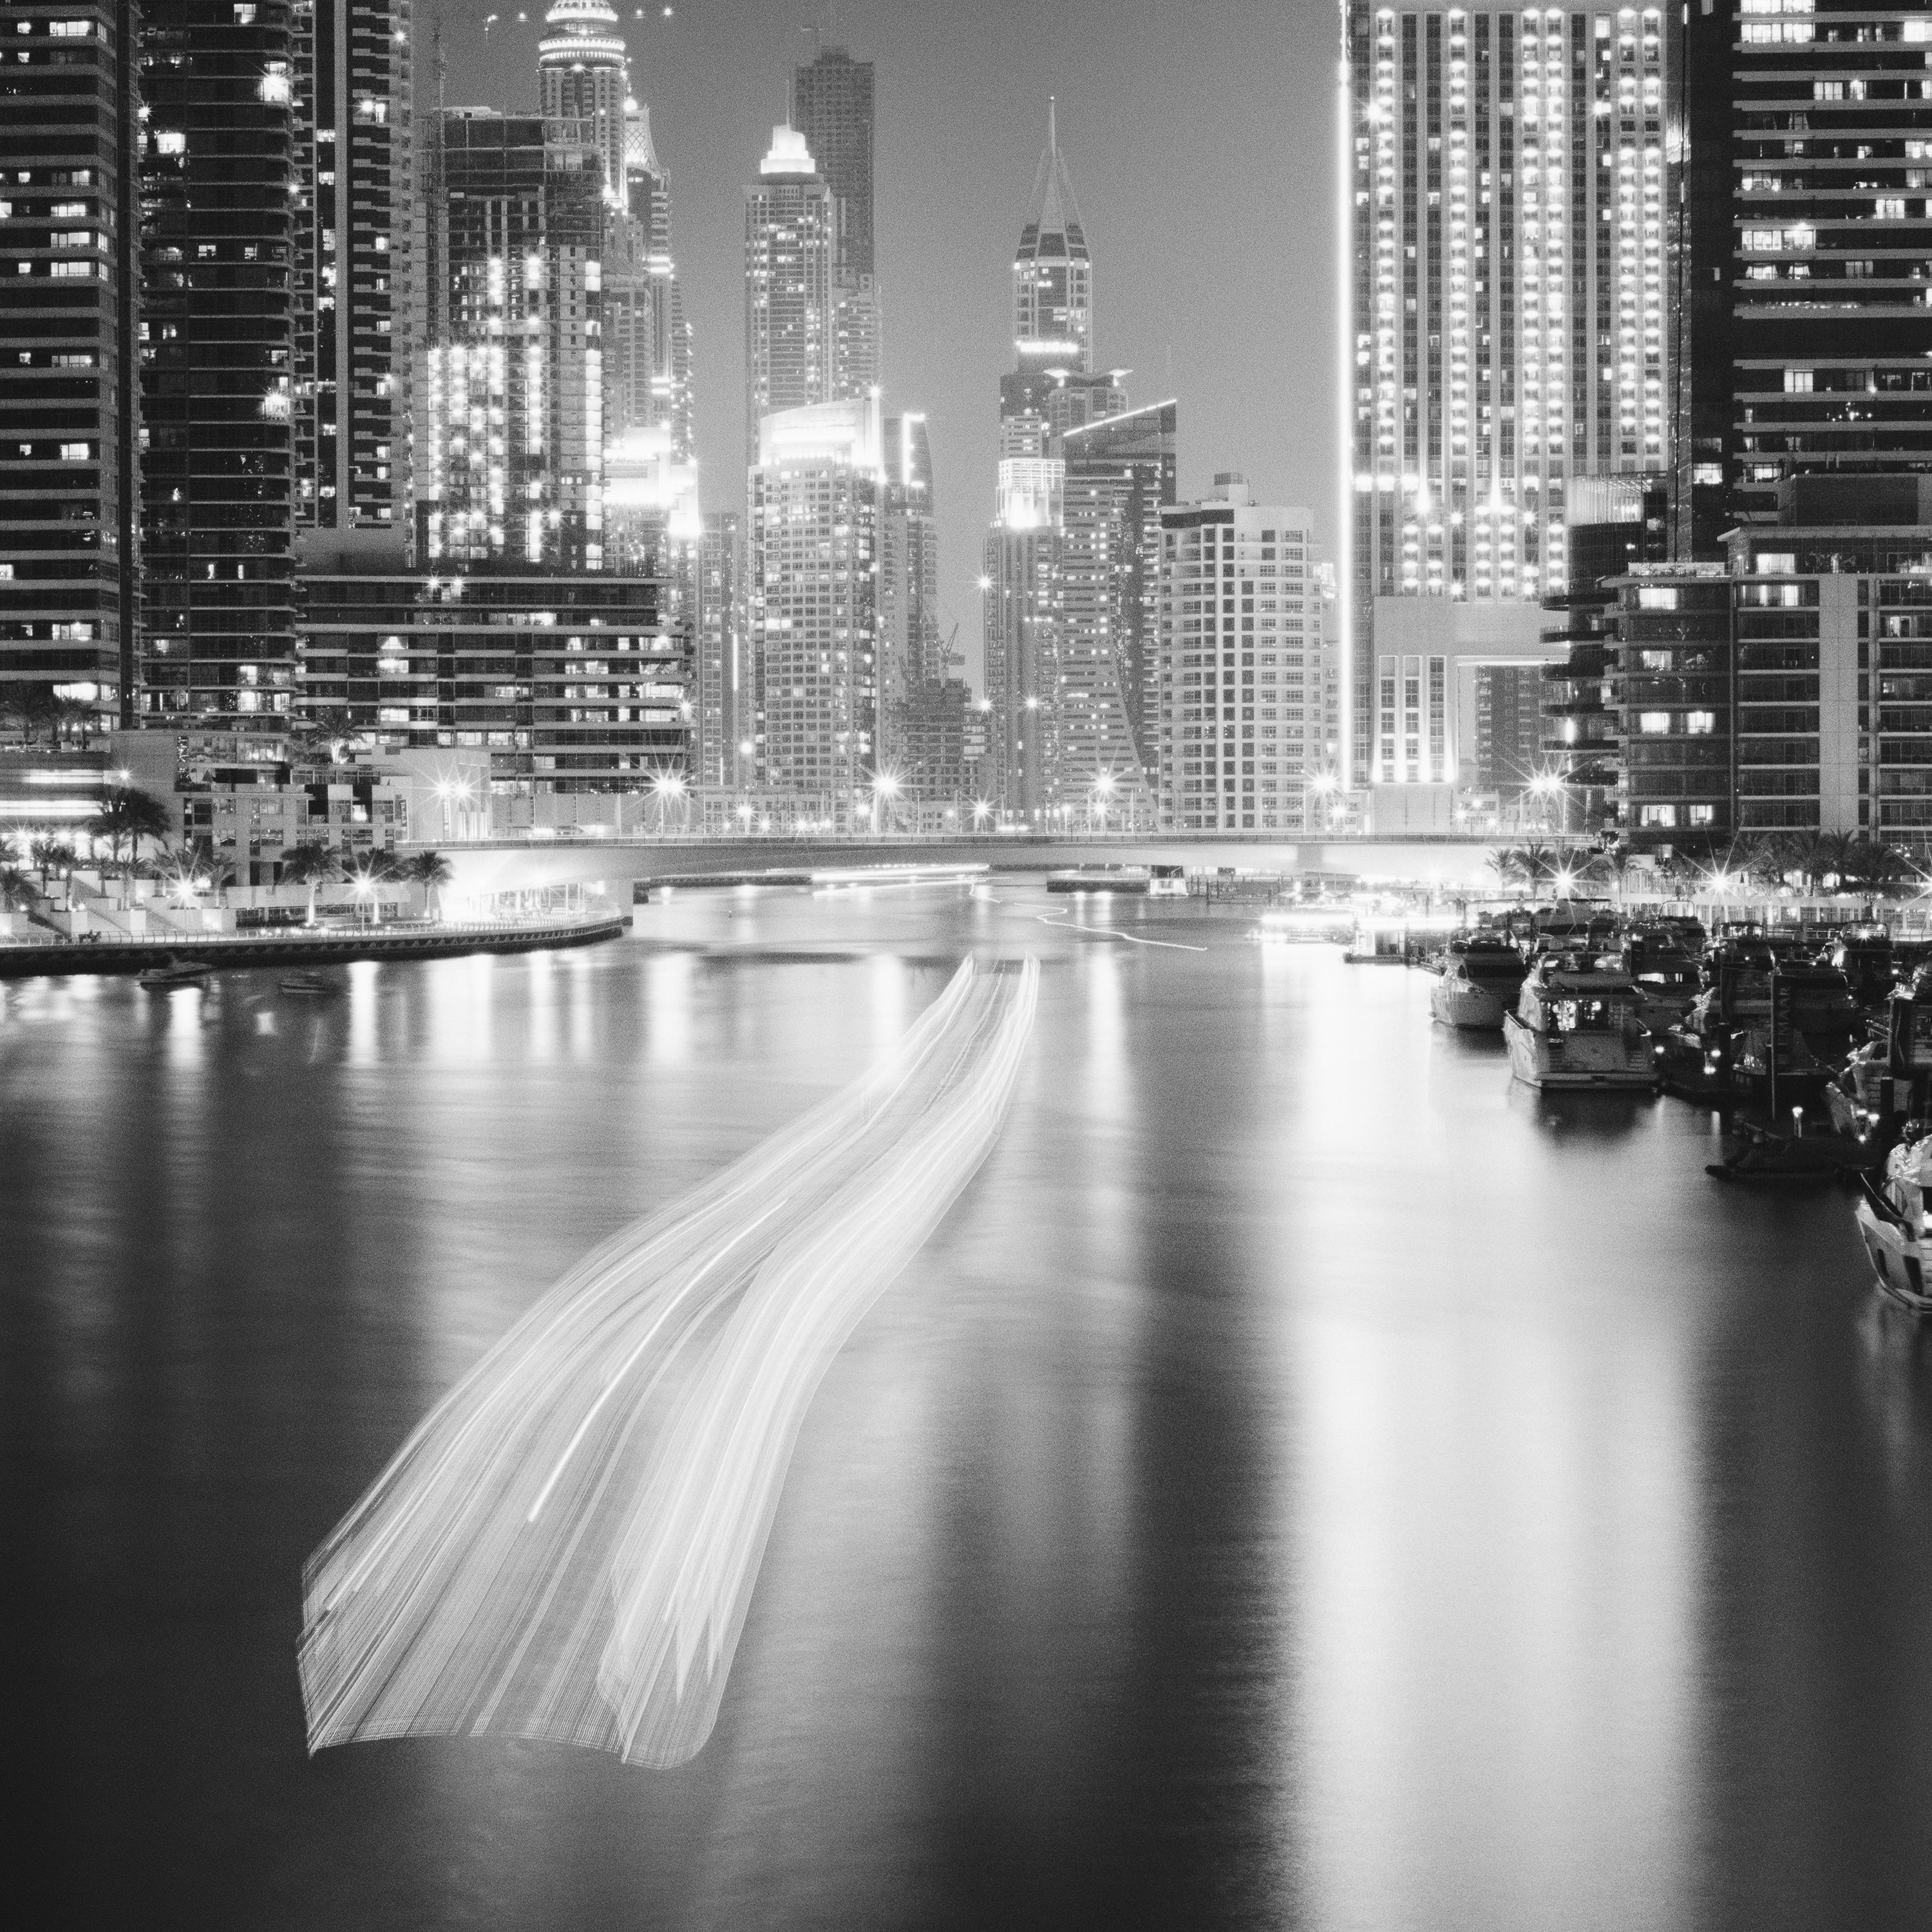 Black and White Fine Art Photography - Dubai marina at night with skyscrapers, yachts and promenade, long exposure. Archival pigment ink print, edition of 20. Signed, titled, dated and numbered by artist. Certificate of authenticity included.